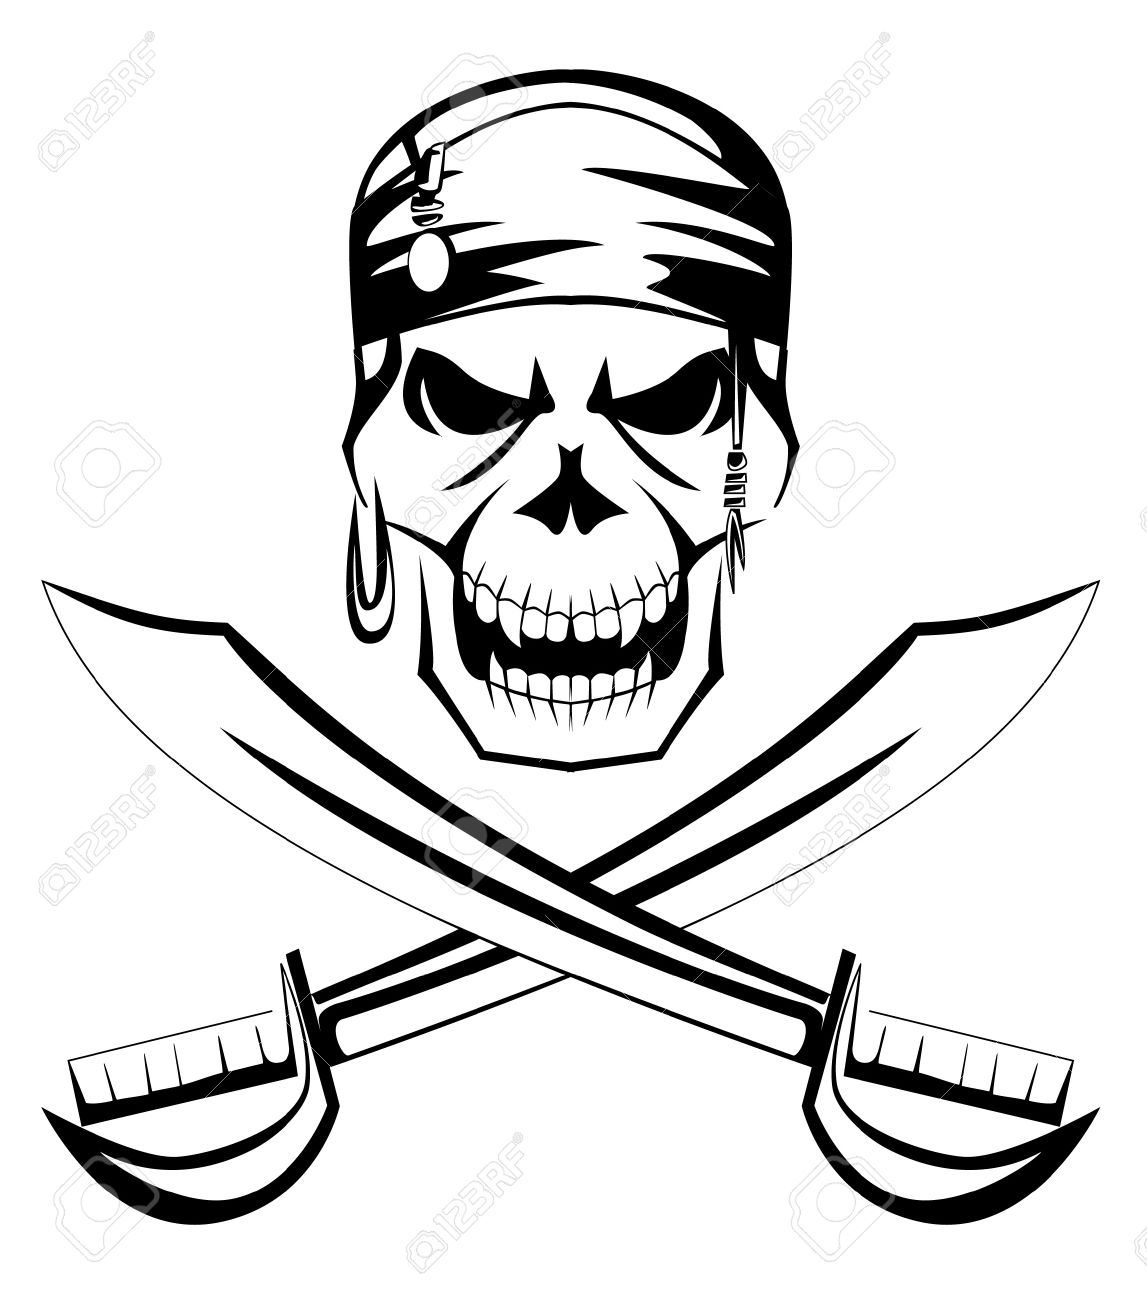 Jolly Roger clipart #2, Download drawings